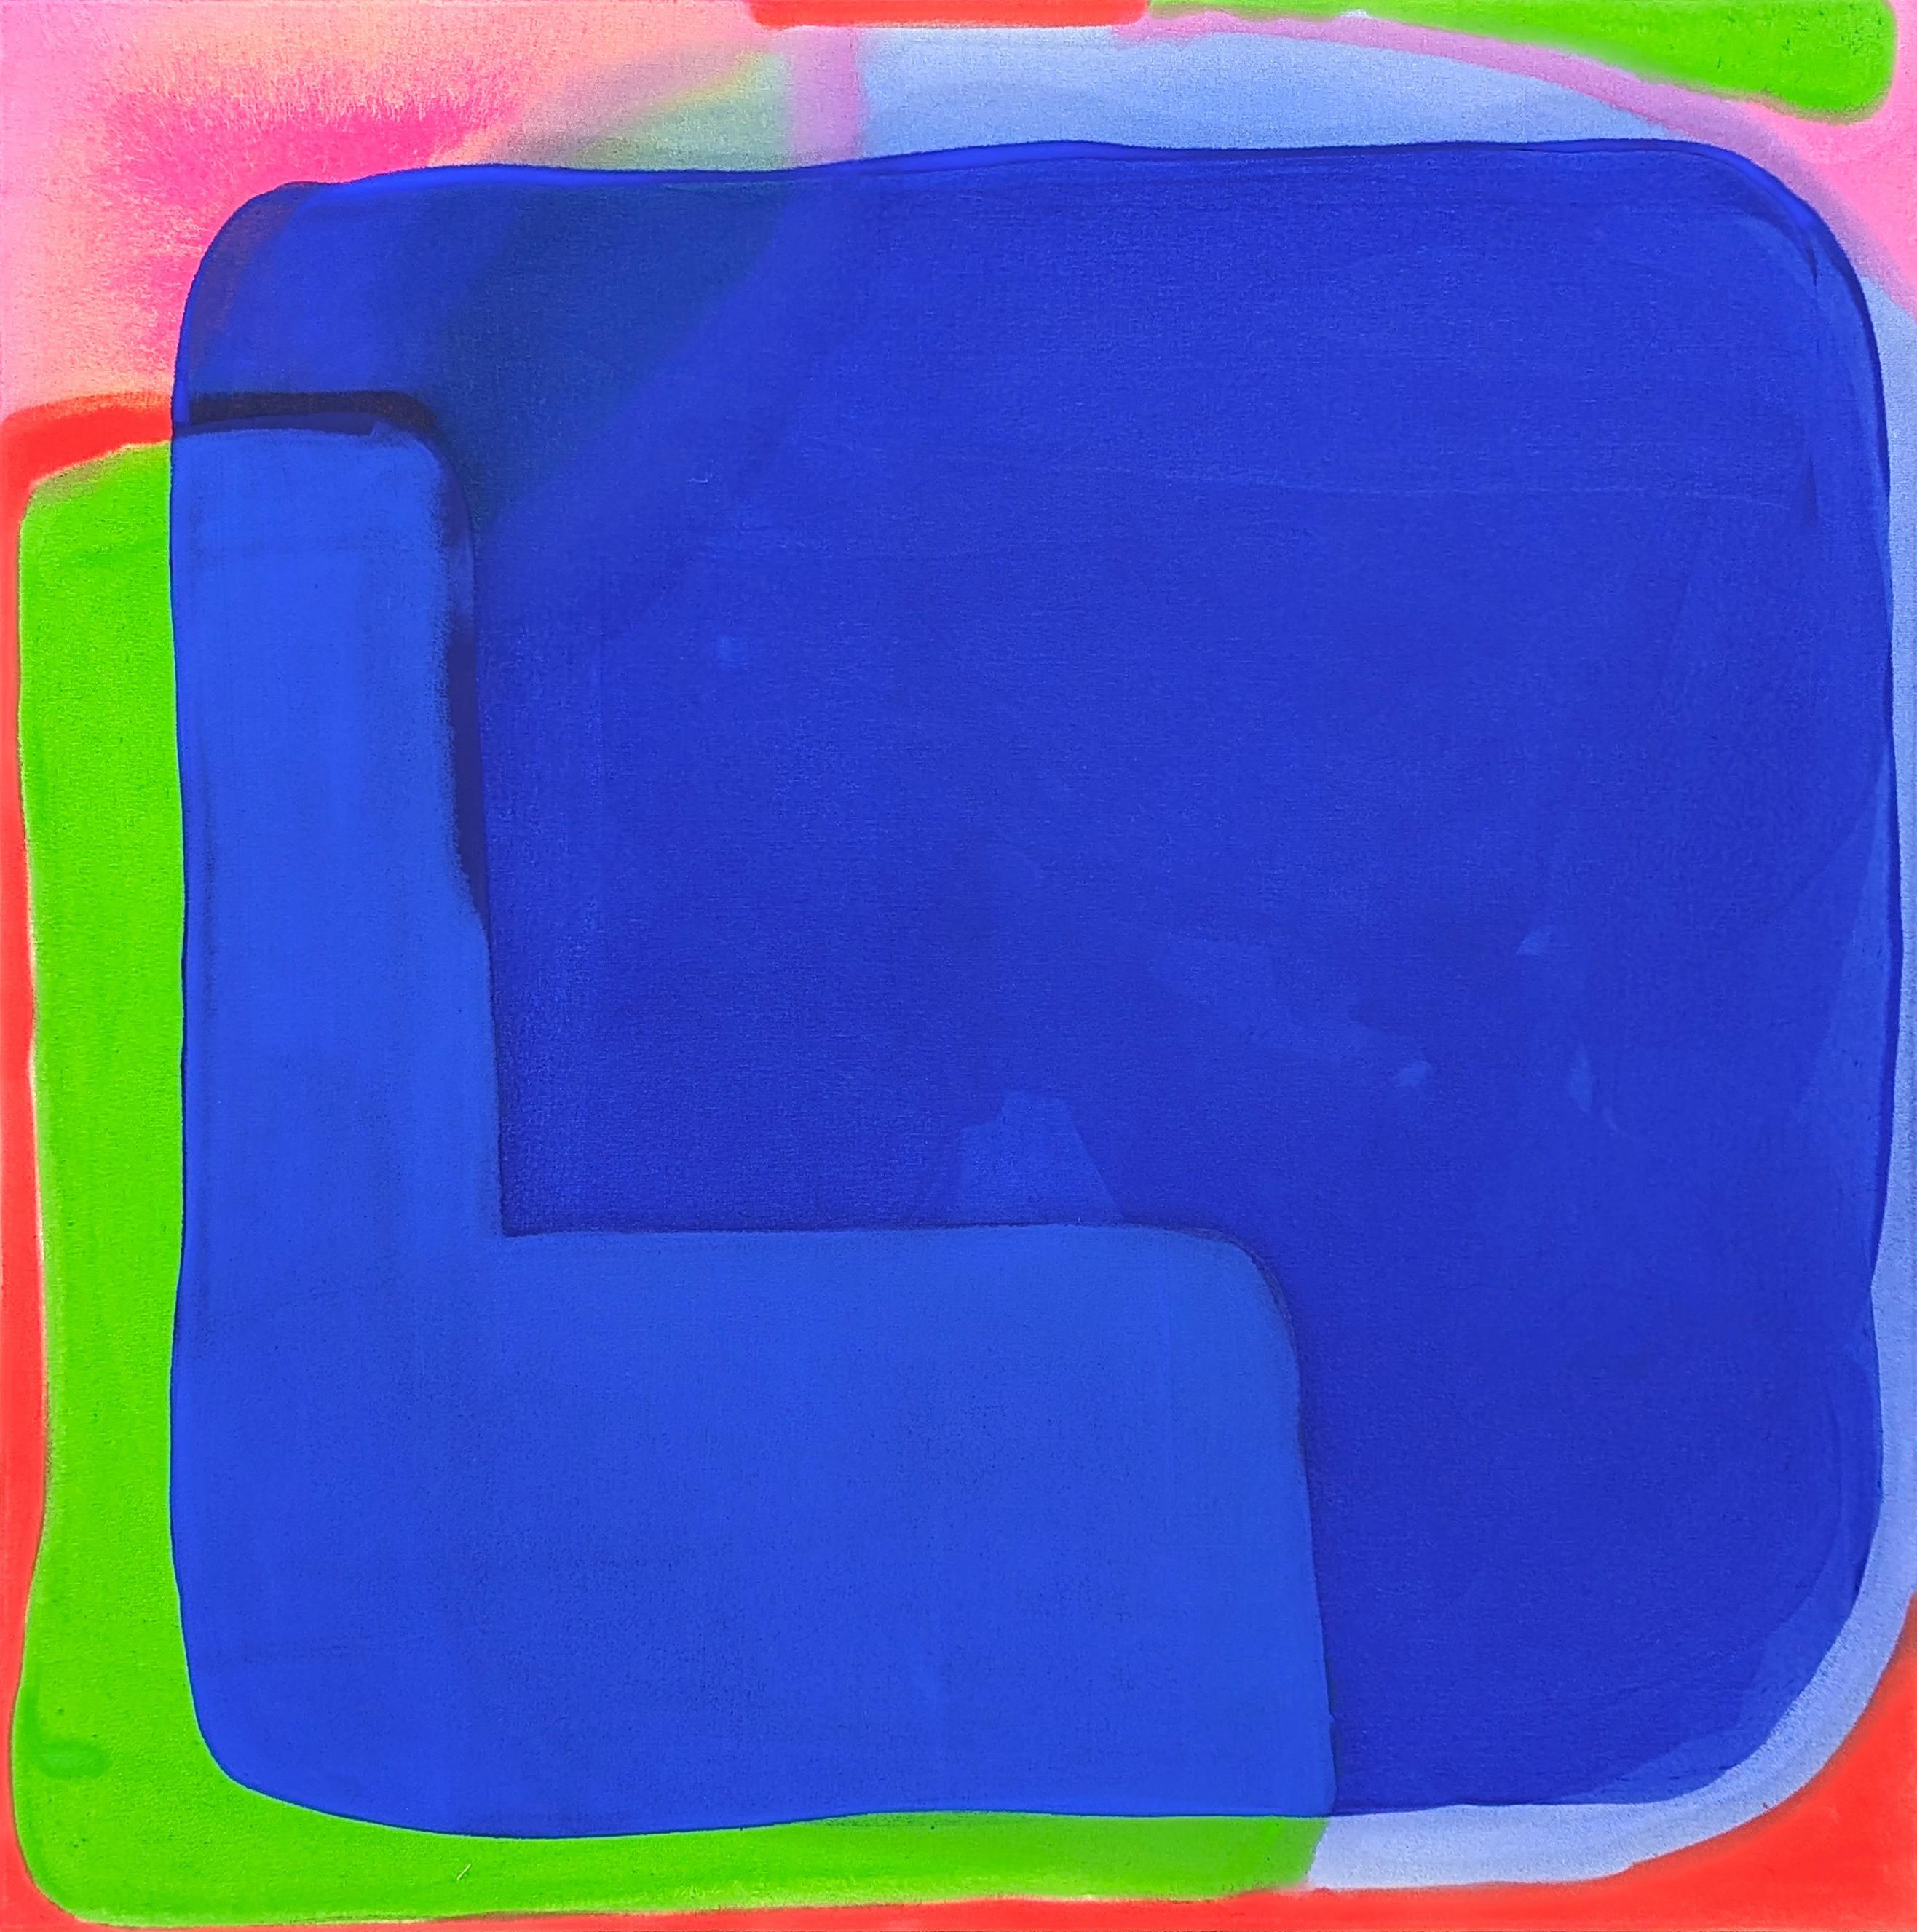 Gary Griffin Abstract Painting - "Boundary" Contemporary Blue, Pink, Green, & Red Tone Color Field Painting